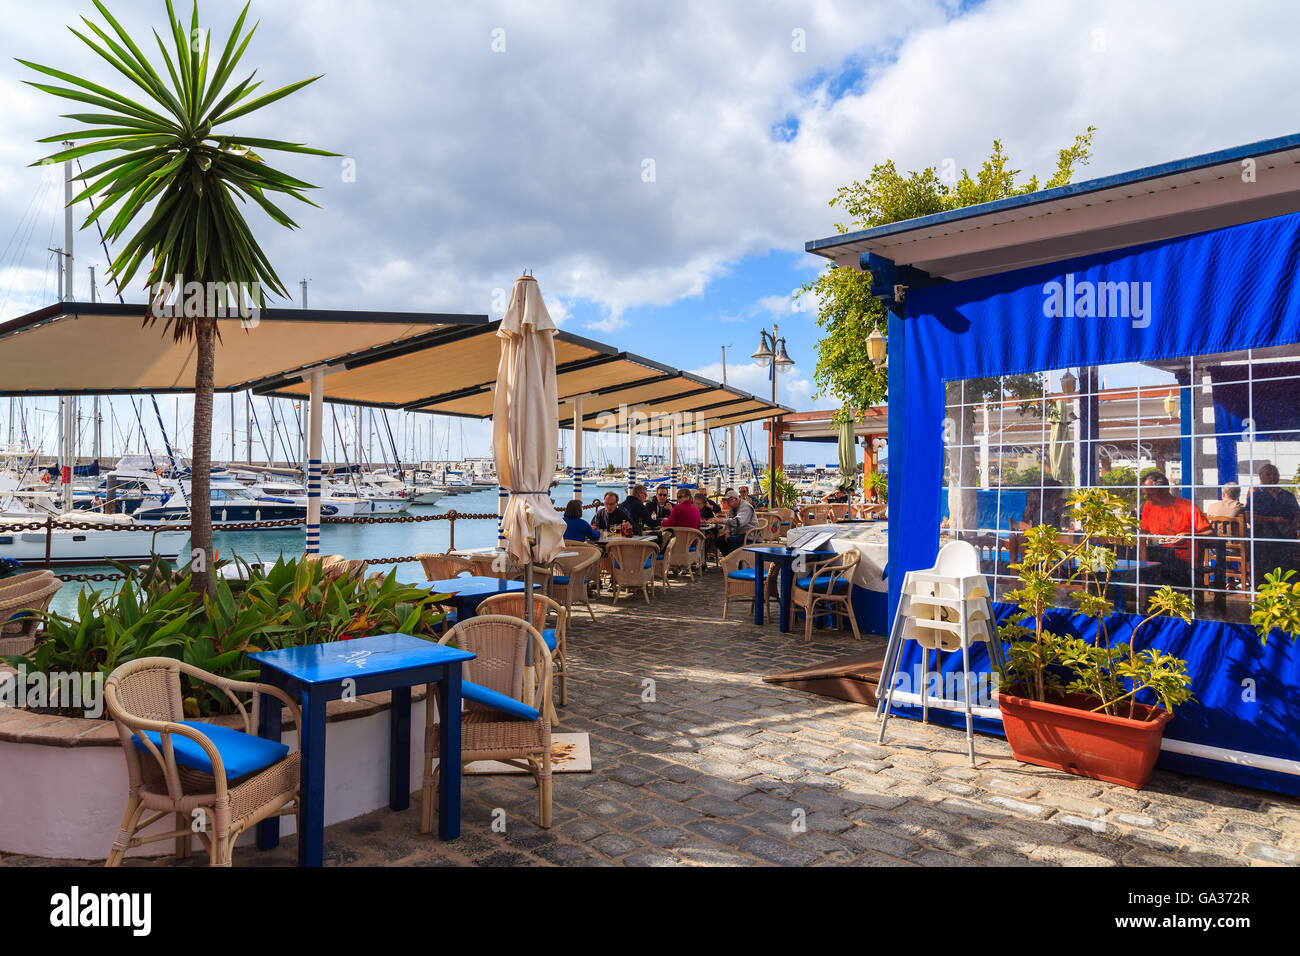 MARINA RUBICON, LANZAROTE ISLAND - JAN 17, 2015: restaurant in port with people dining in Rubicon yacht port. Lanzarote is most northern island in Canary Islands archipelago. Stock Photo